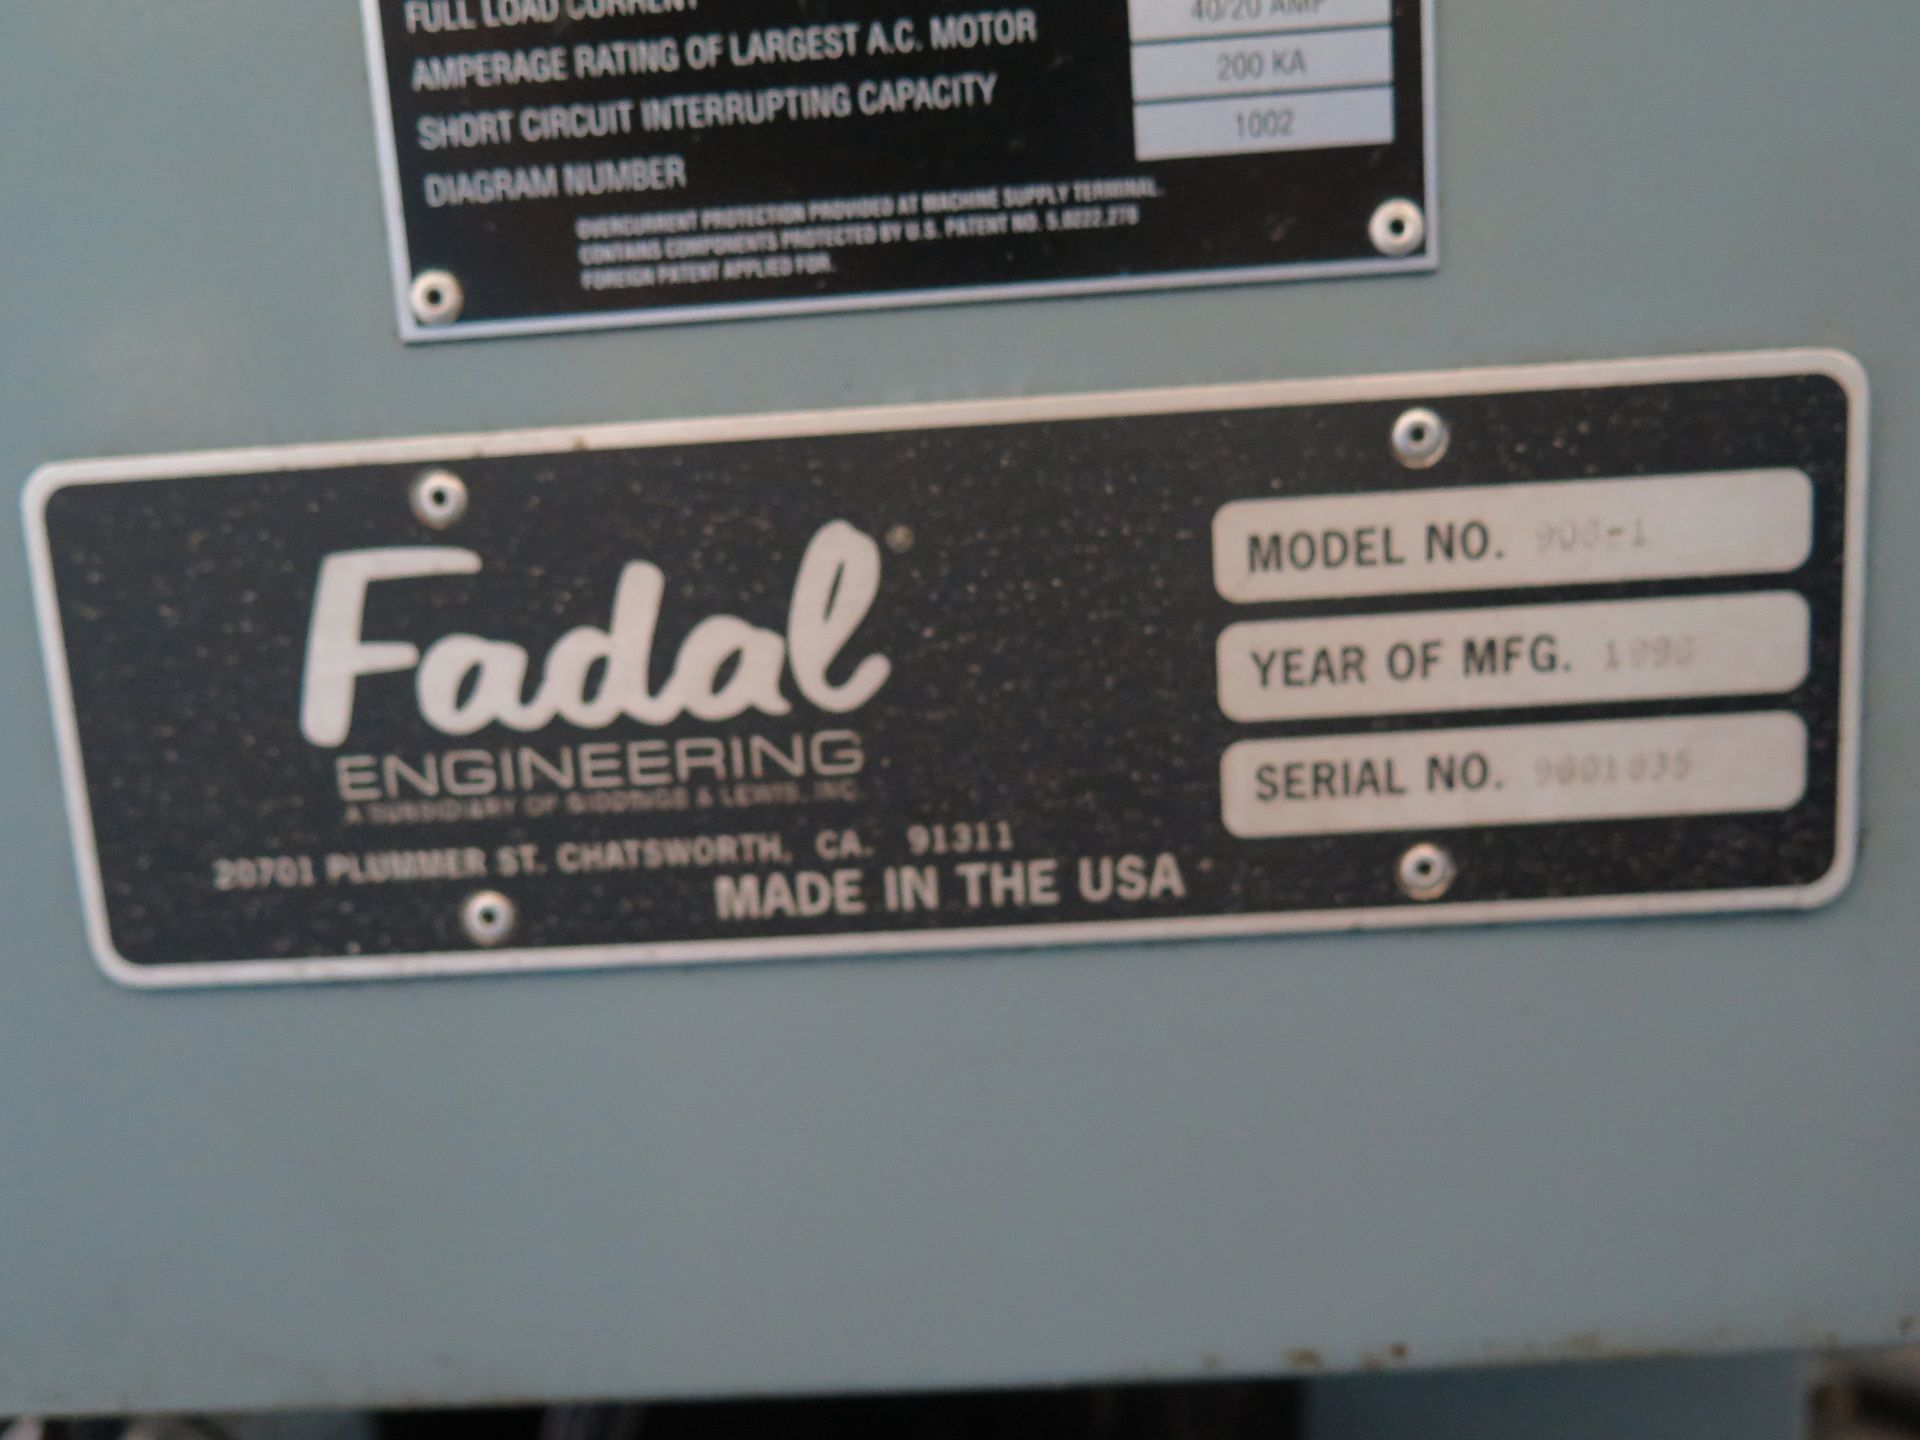 1996 FADAL VMC4020HT 2-PALLET 4-AXIS CNC VERTICAL MACHINING CENTER S/N 9601835 W/ FADAL CNC 32MP - Image 5 of 7